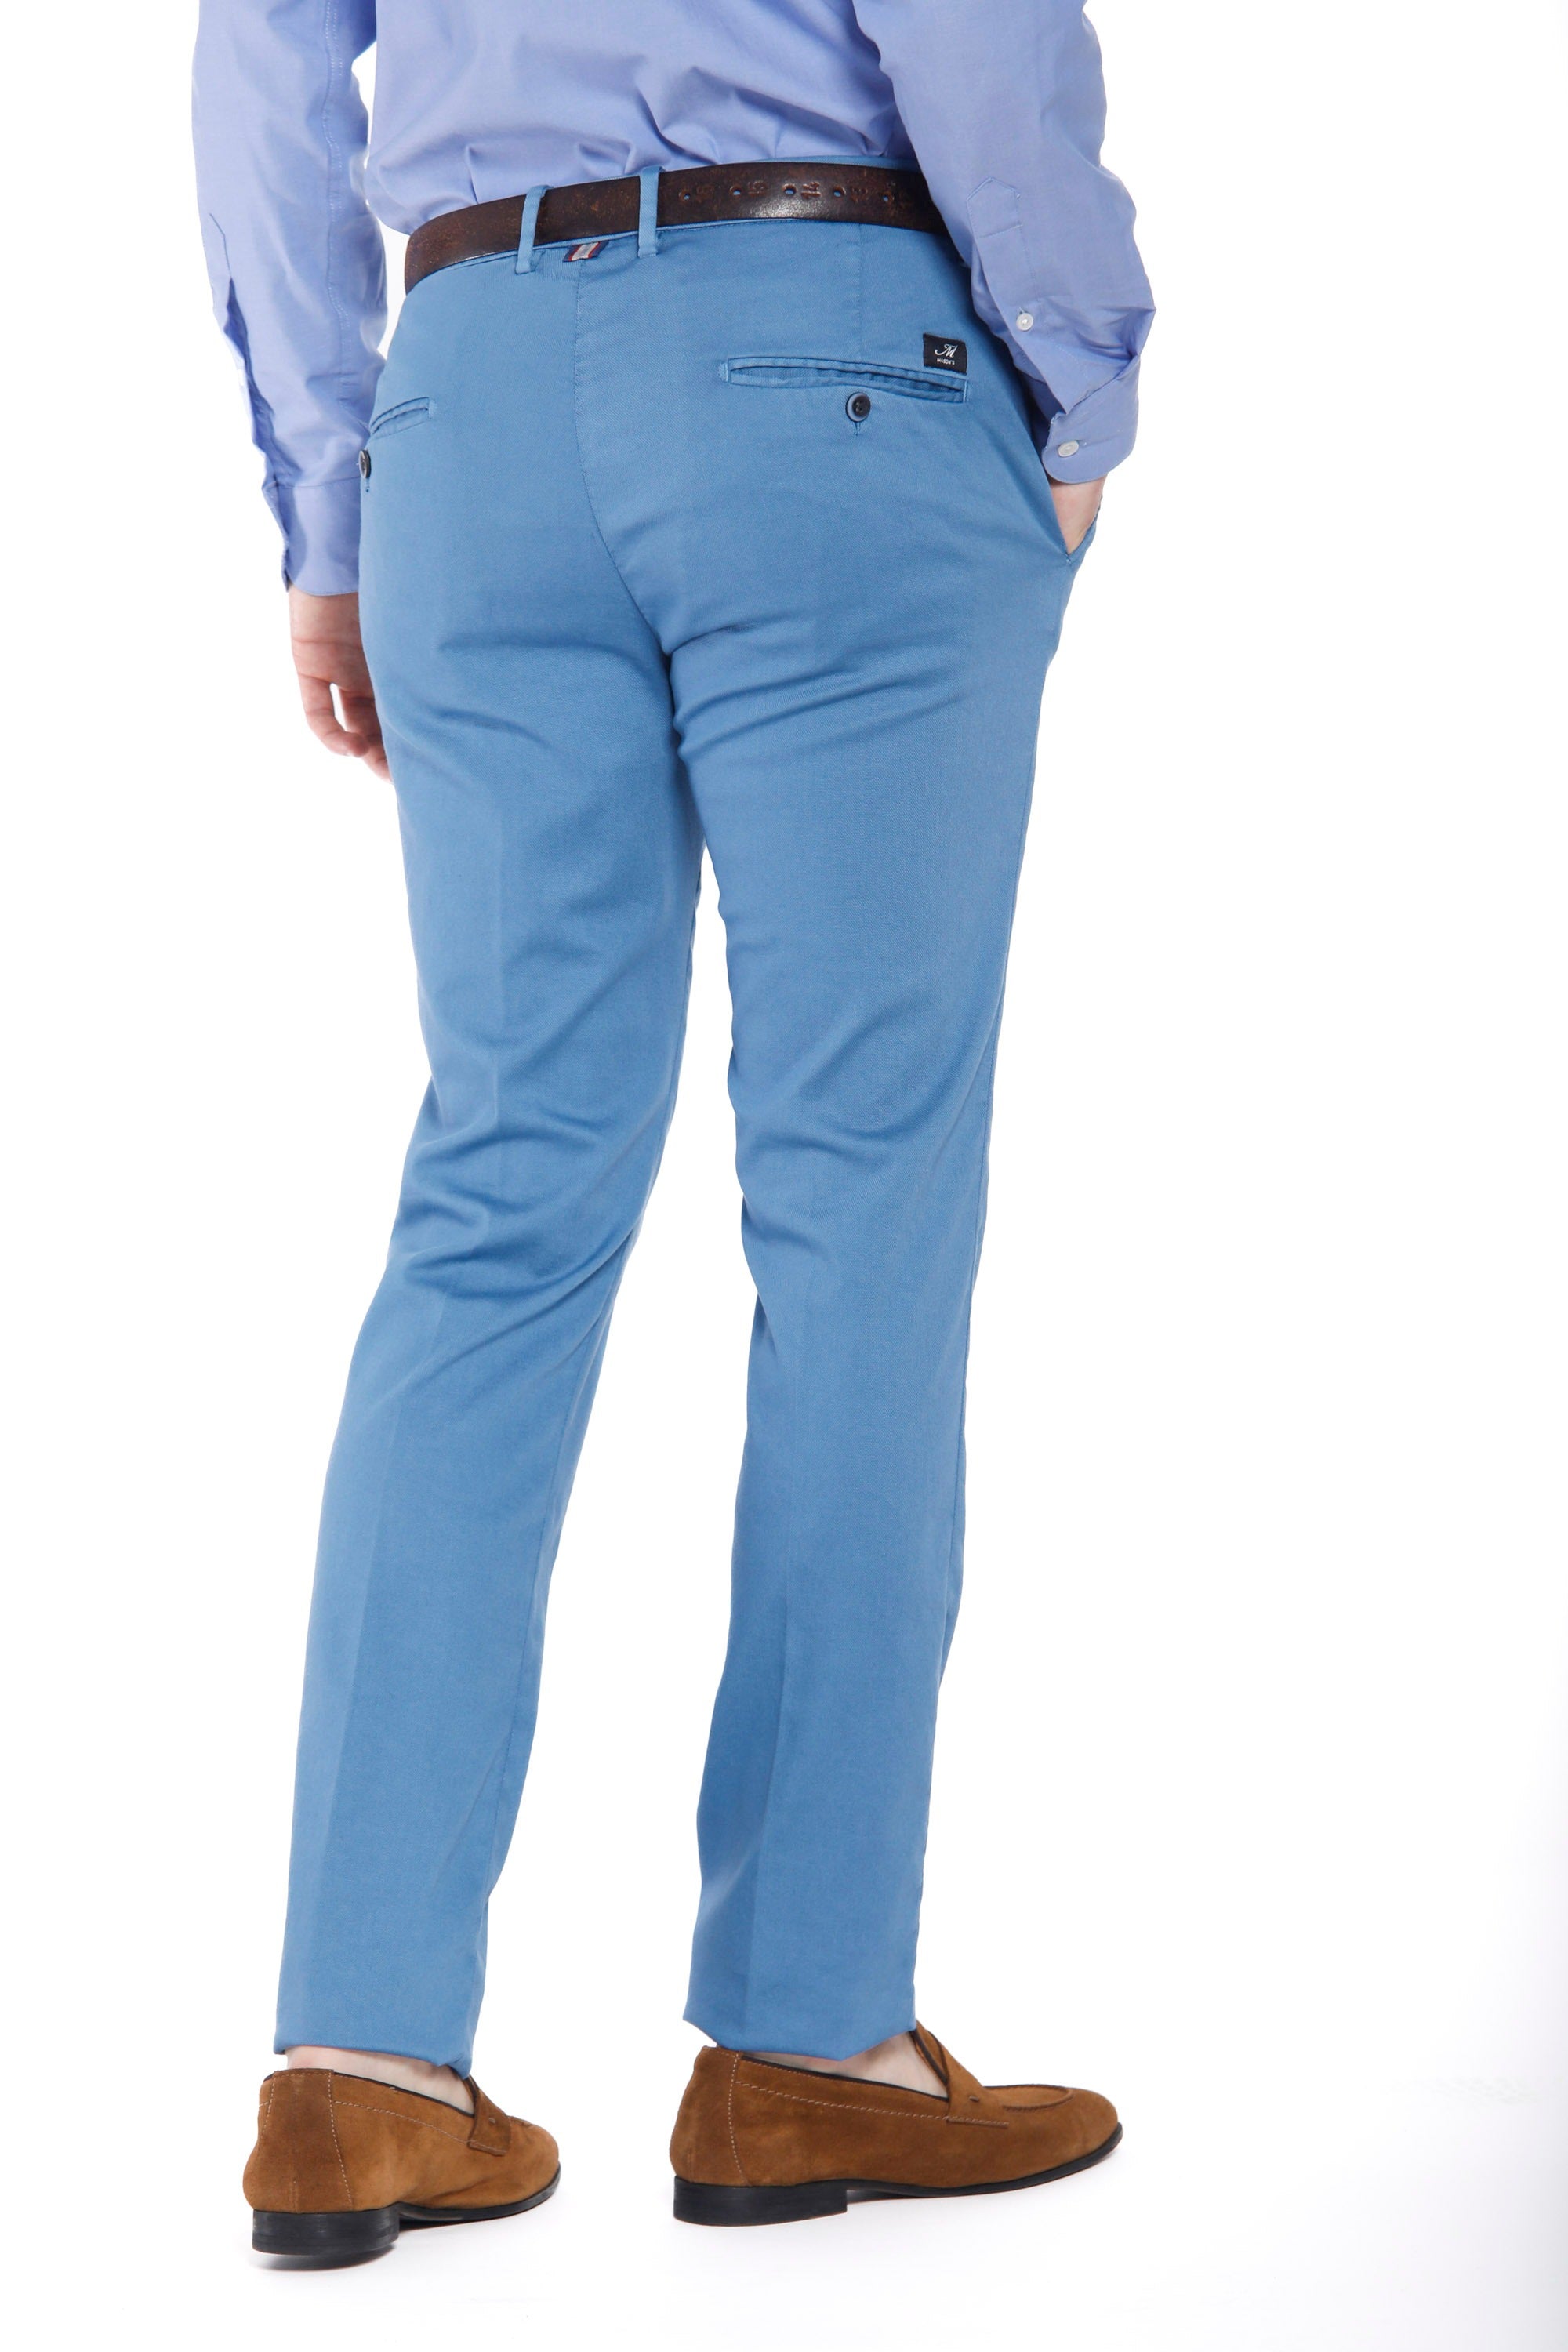 Torino Style man chino pants in cotton and tencel slim